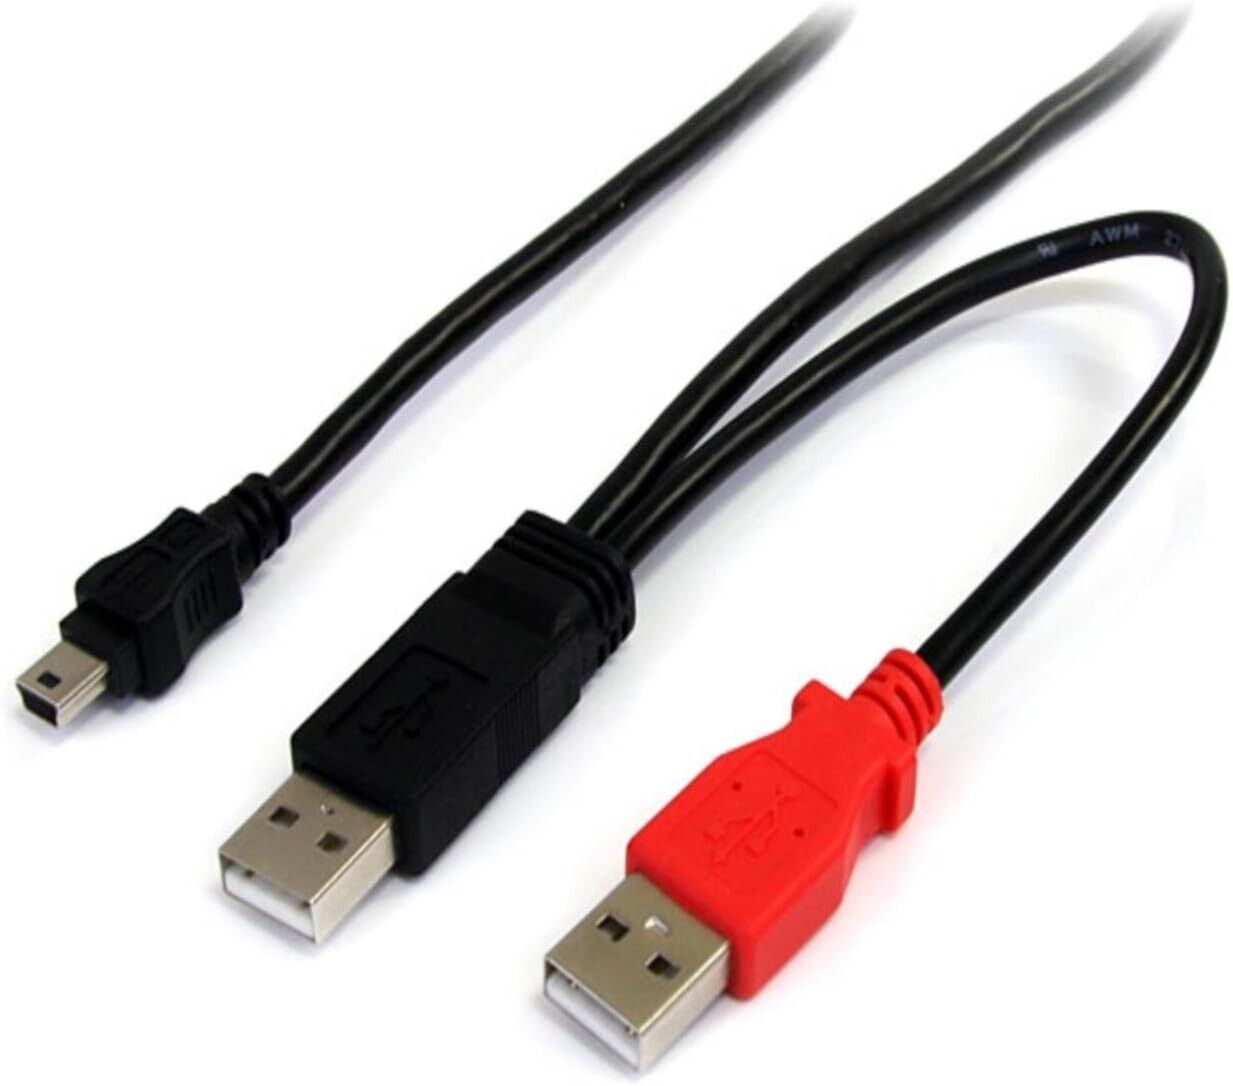 1 FT USB Y CABLE FOR EXTERNAL HARD DRIVE USB A TO MINI B USB CABLE USB M TO MINI